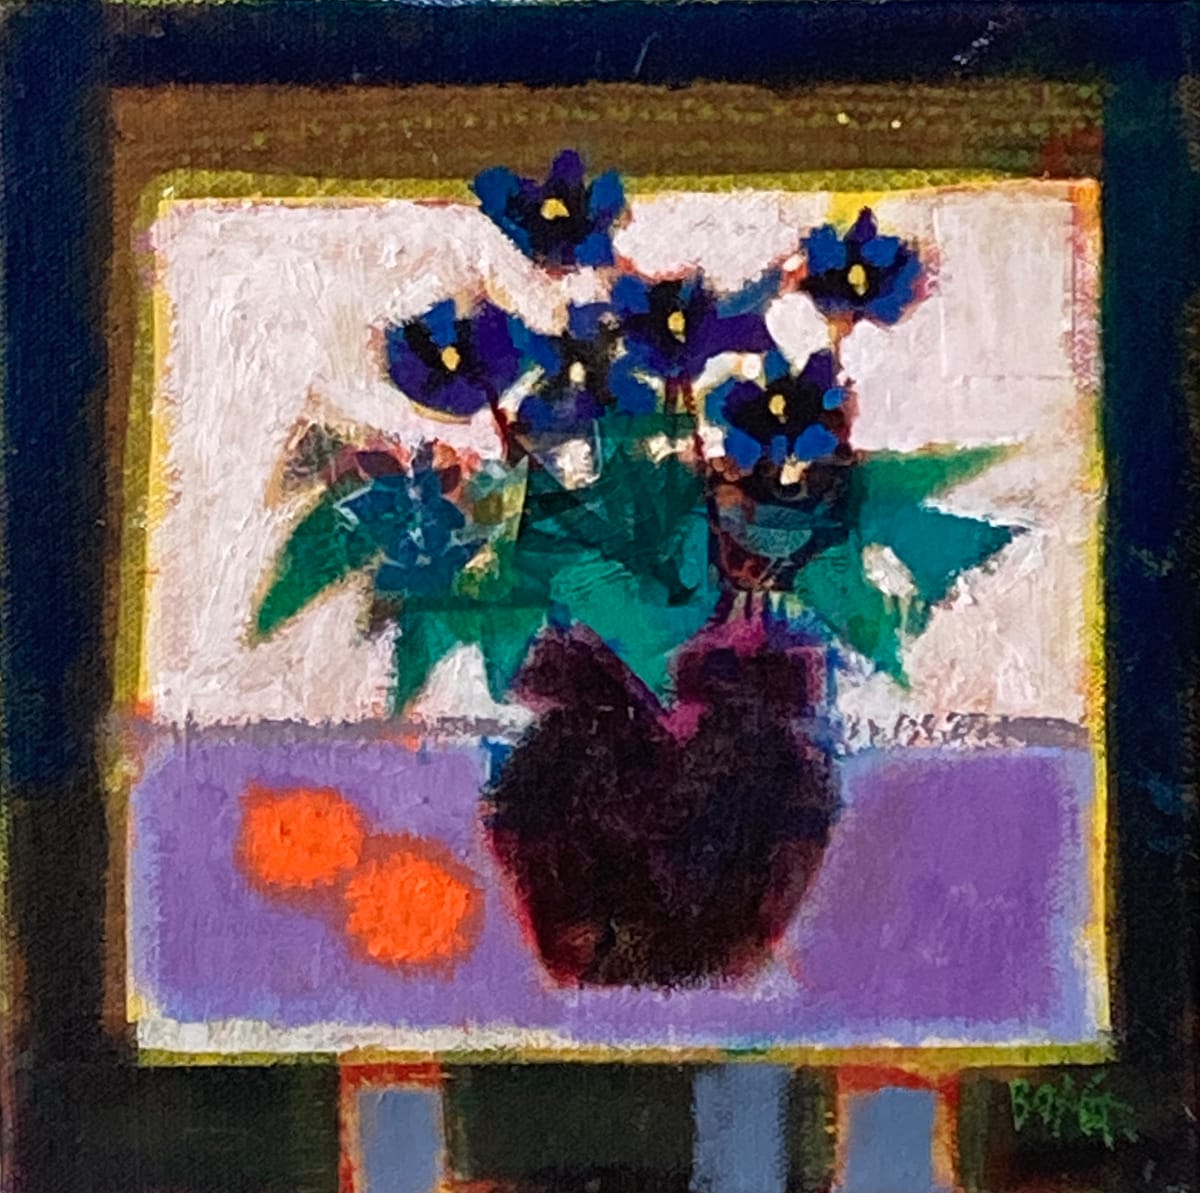 Violets and clementines by francis boag 